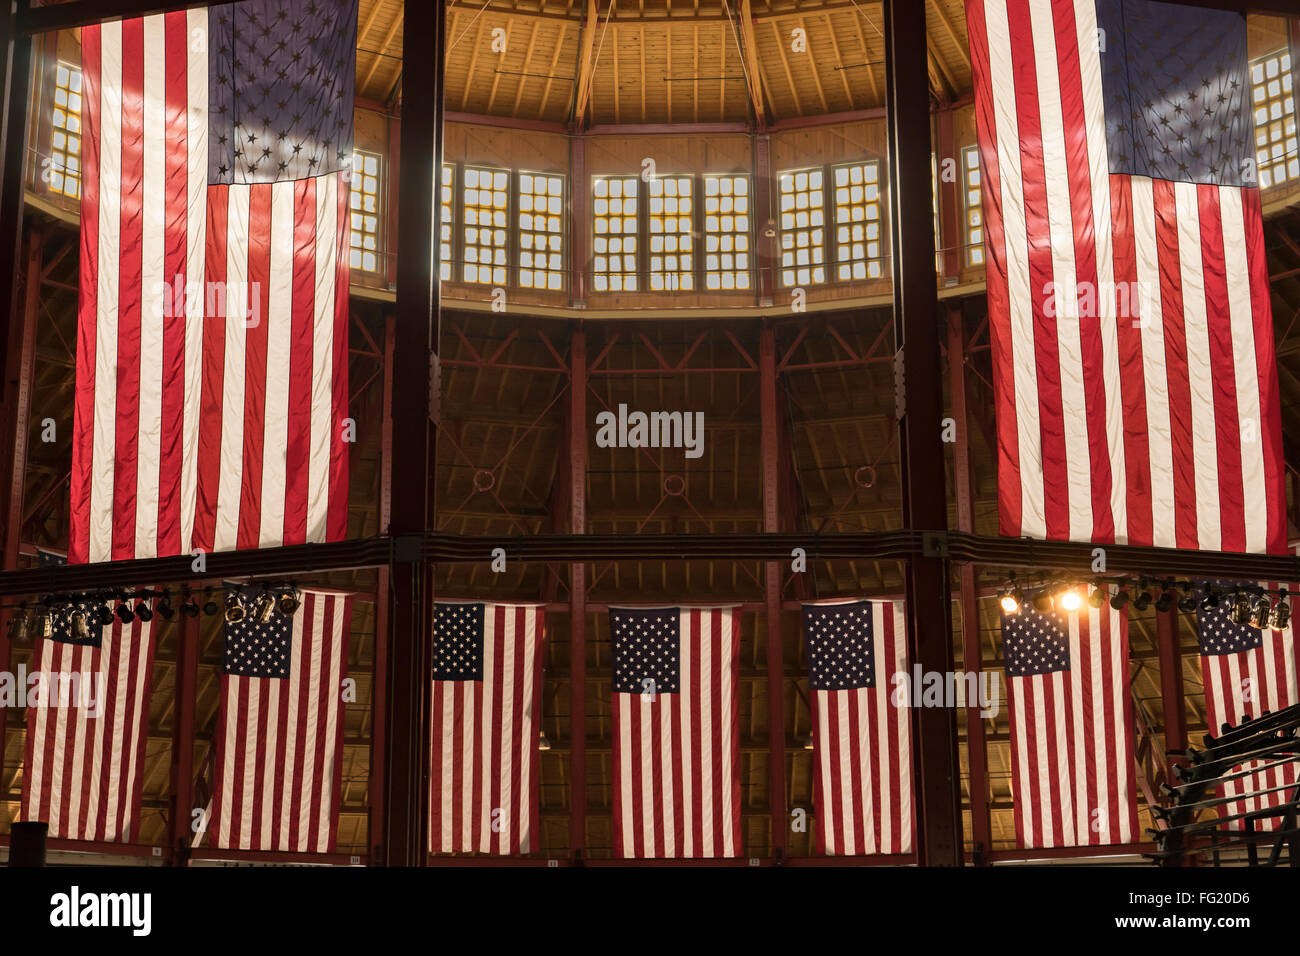 United States, Maryland, Baltimore, B&O Railroad Museum, flags inside round house Stock Photo